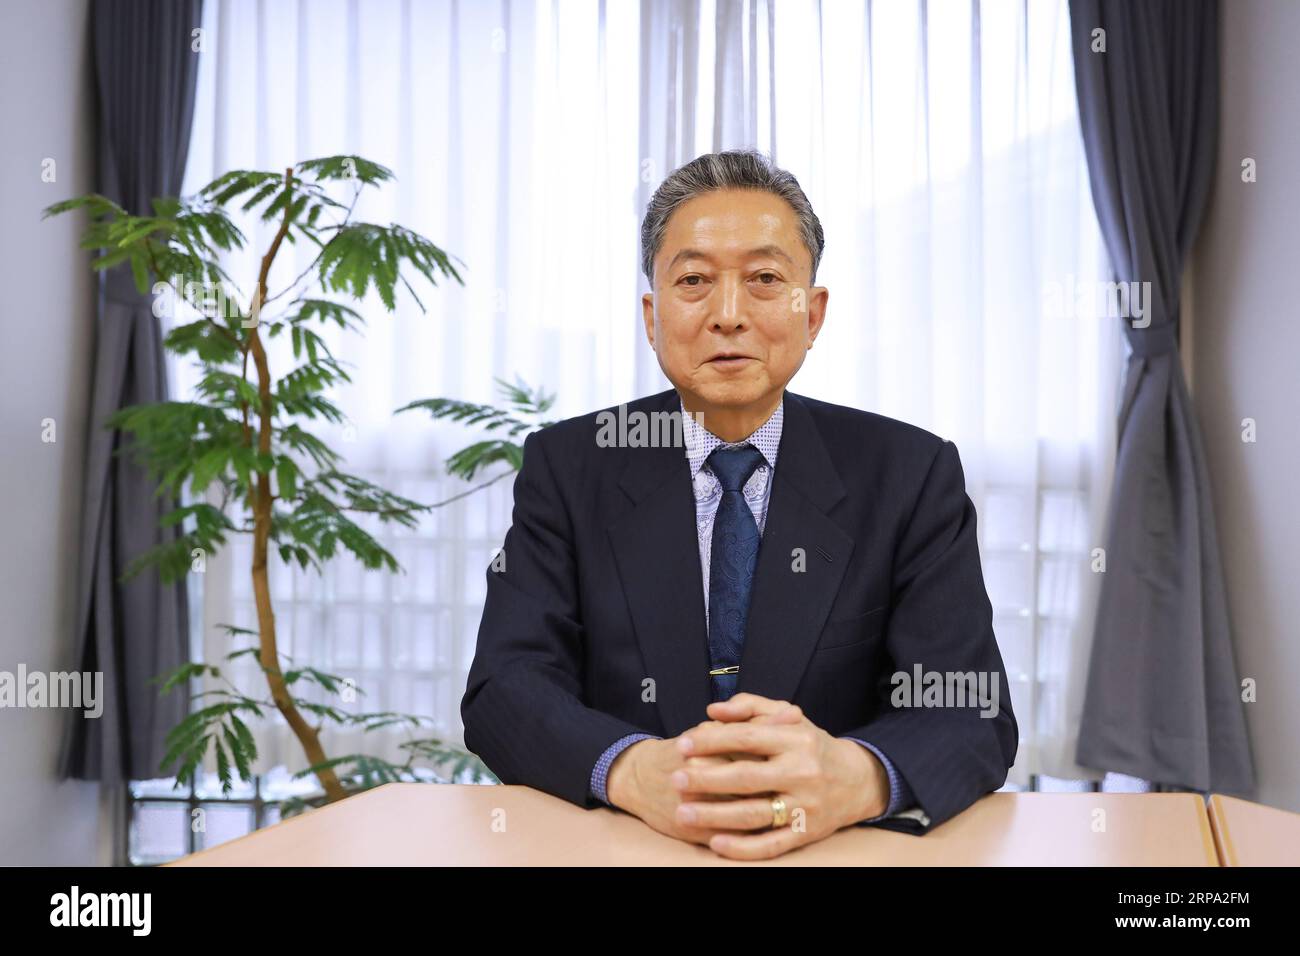 (190423) -- TOKYO, April 23, 2019 (Xinhua) -- Former Japanese Prime Minister Yukio Hatoyama is seen in Tokyo, Japan, March 4, 2019. China-proposed Belt and Road Initiative (BRI) has greatly helped enhance regional peace and prosperity, Yukio Hatoyama has said in an exclusive interview with Xinhua. Hatoyama is expected to attend the second Belt and Road Forum for International Cooperation (BRF), to be held in Beijing, capital of China, on April 25-27, with the theme of Belt and Road Cooperation, Shaping a Brighter Shared Future. (Xinhua/Du Xiaoyi) JAPAN-TOKYO-YUKIO HATOYAMA-INTERVIEW PUBLICATIO Stock Photo